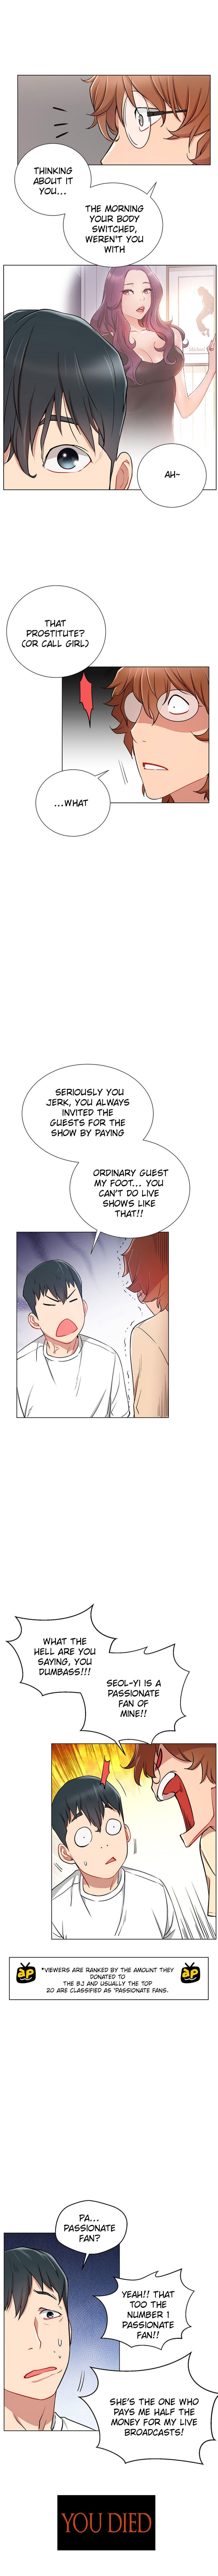 do-you-want-to-collab-chap-7-8